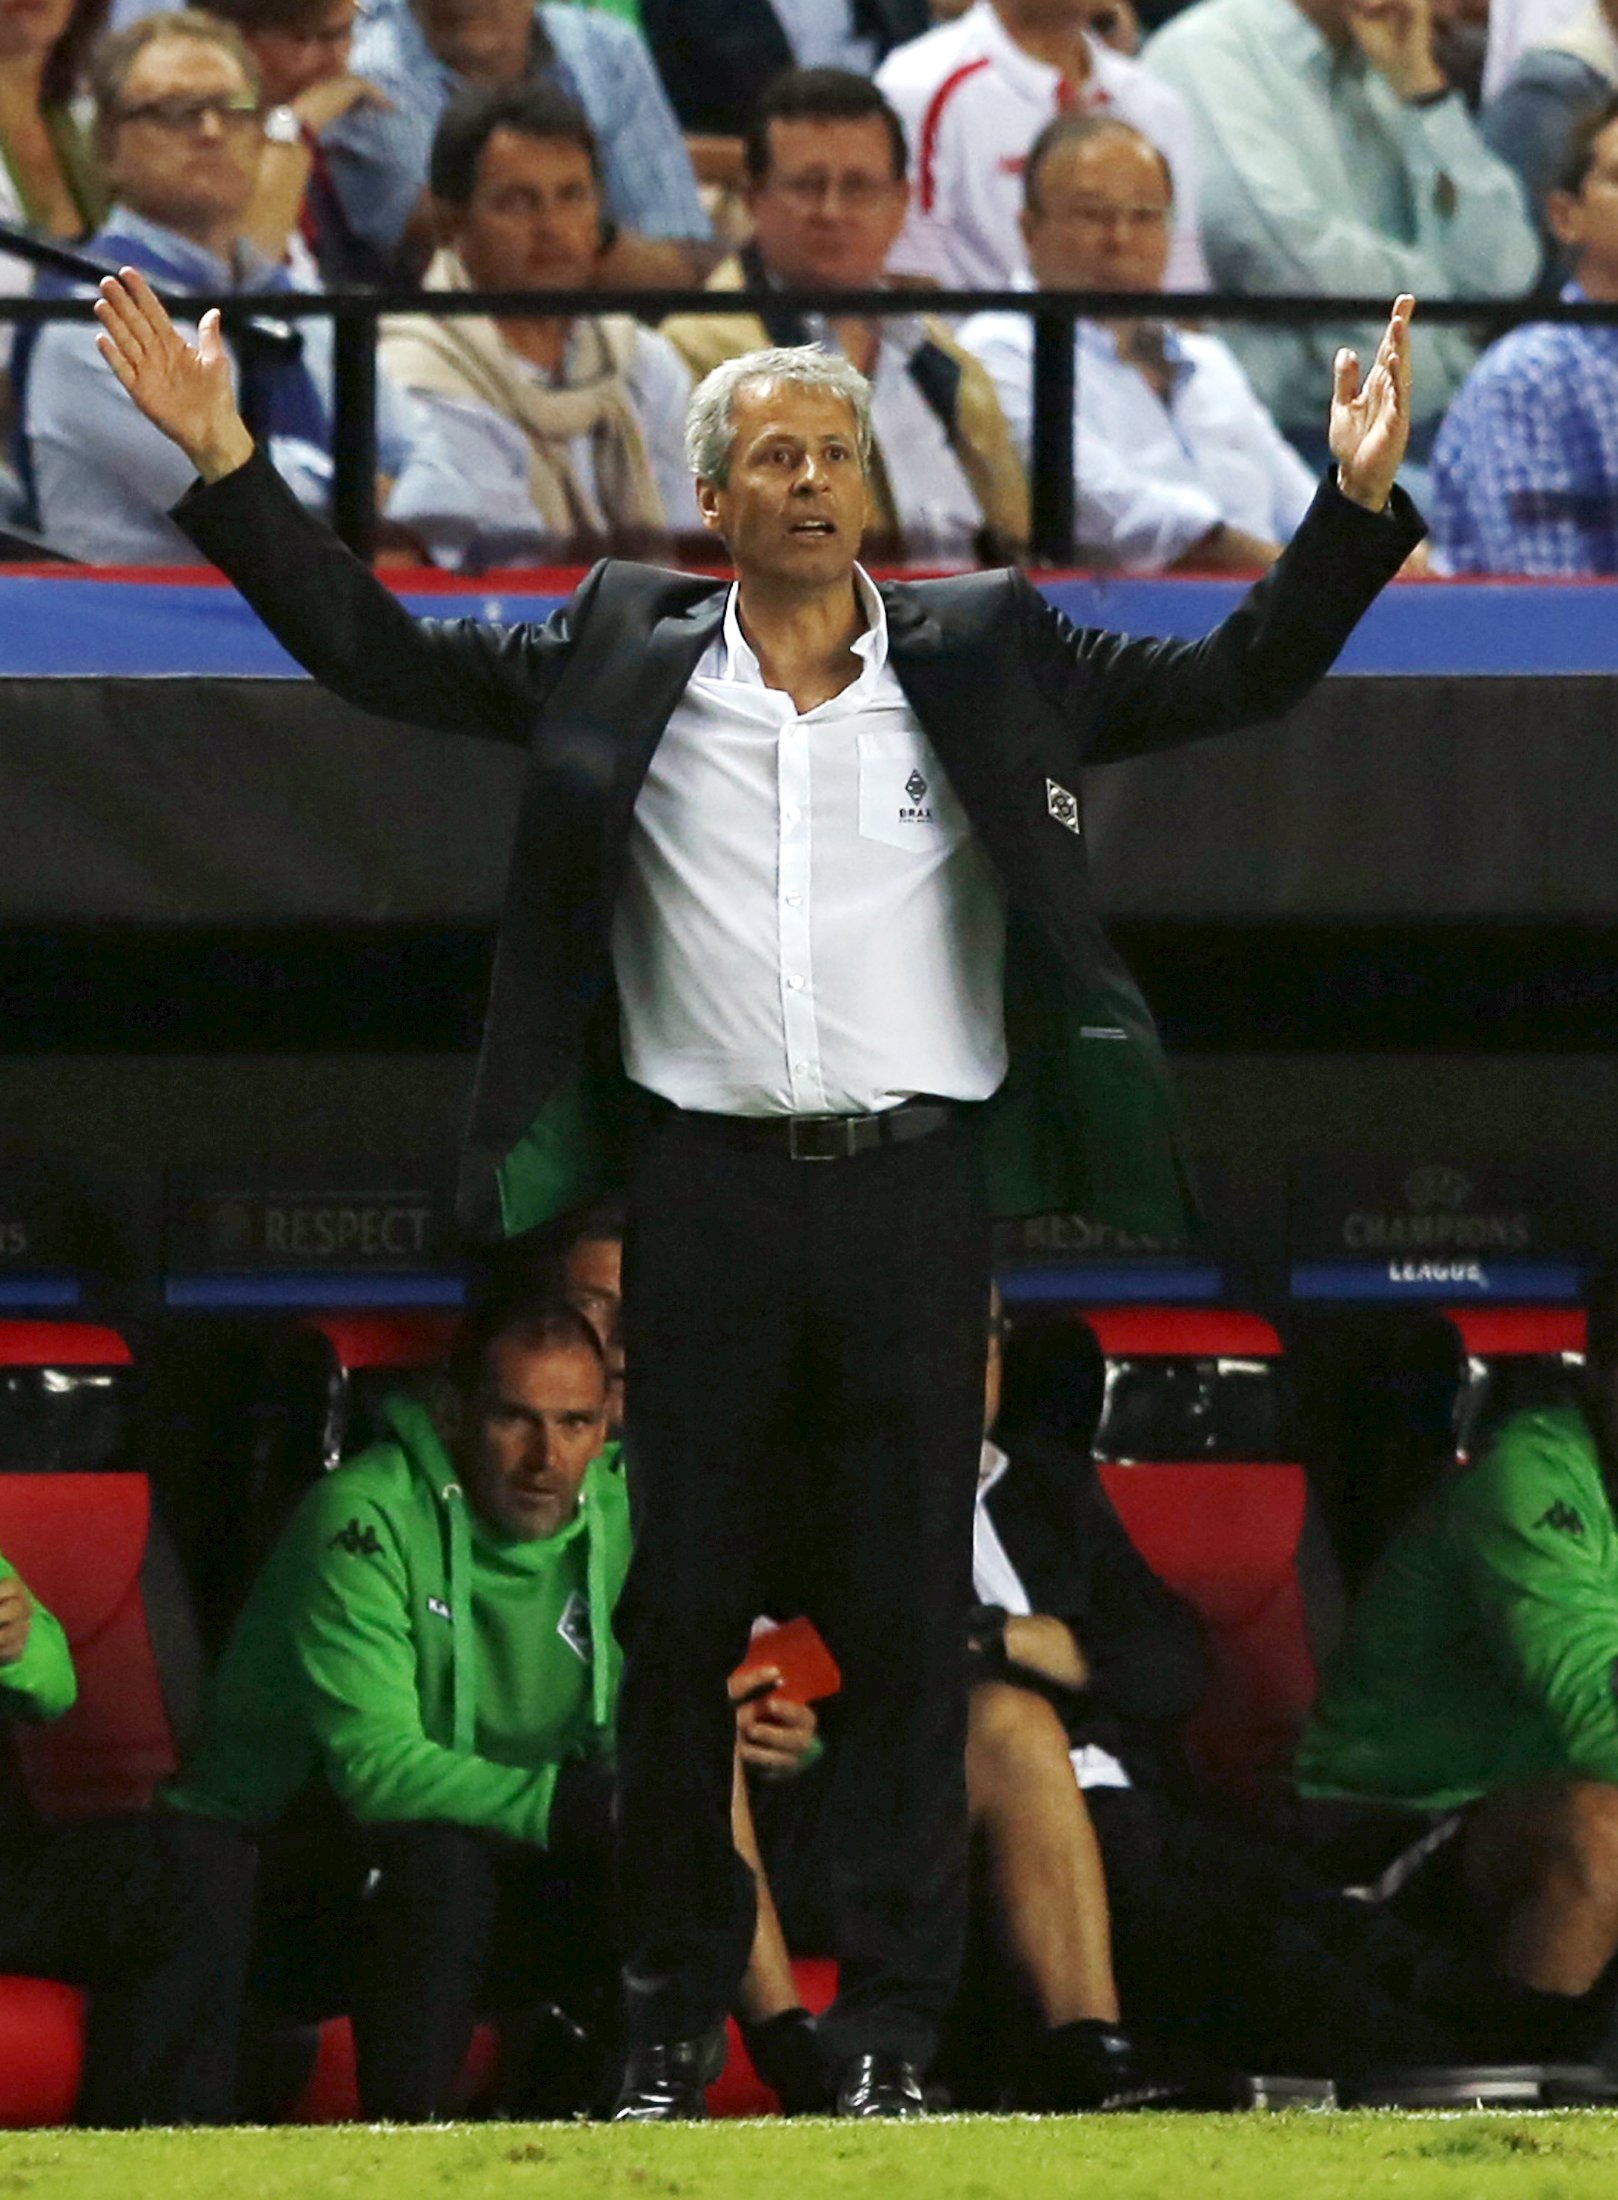 Moenchengladbach's coach Lucien Favre reacts during their Champions League group D soccer match against Sevilla at Ramon Sanchez Pizjuan stadium in Seville, September 15, 2015. REUTERS/Marcelo del Pozo